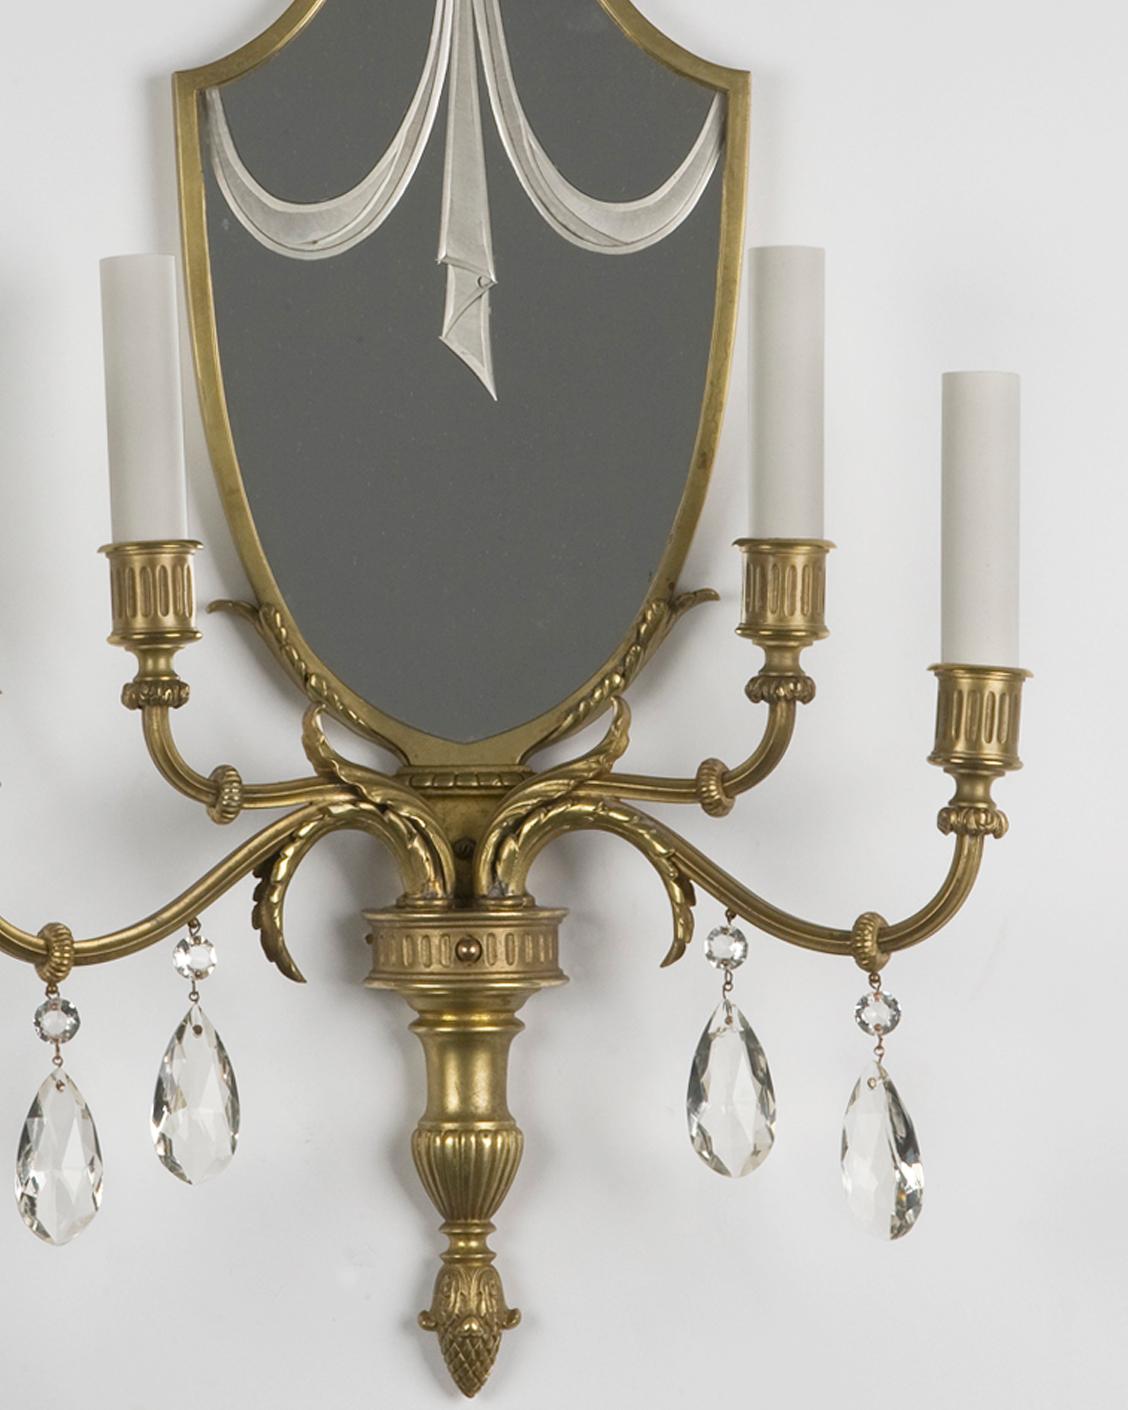 American Antique Four Arm Wheel Cut Mirrorback Sconces from Henry Ford Museum Circa 1920s For Sale